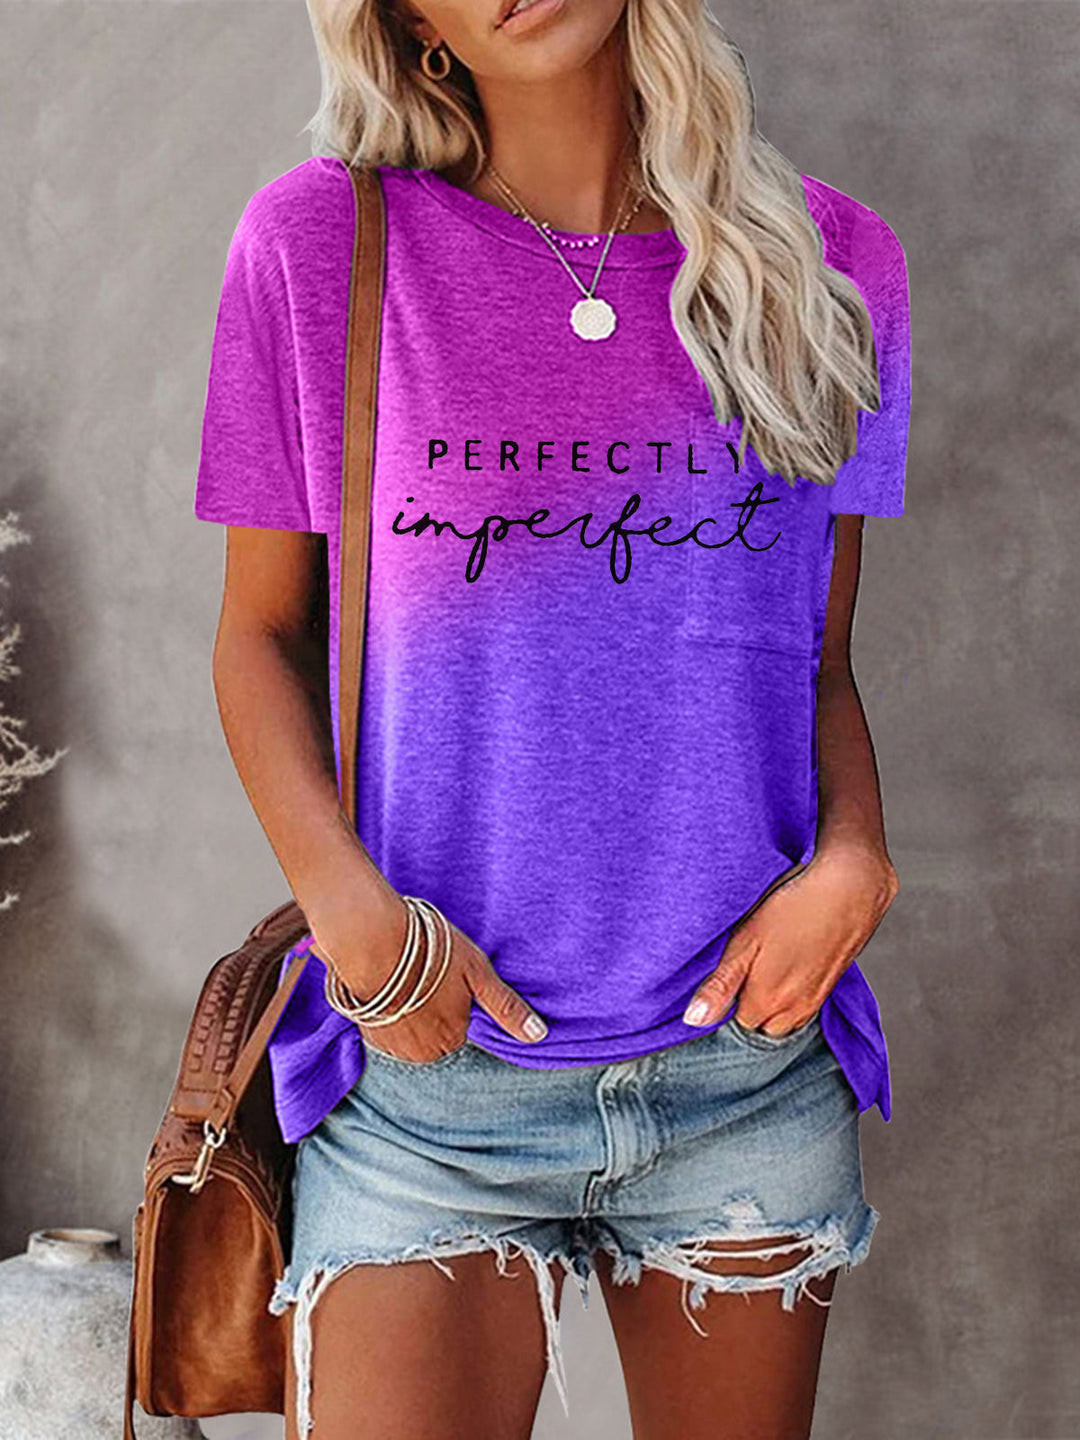 Women's Perfectly Imperfect Casual Tie Dye Tee